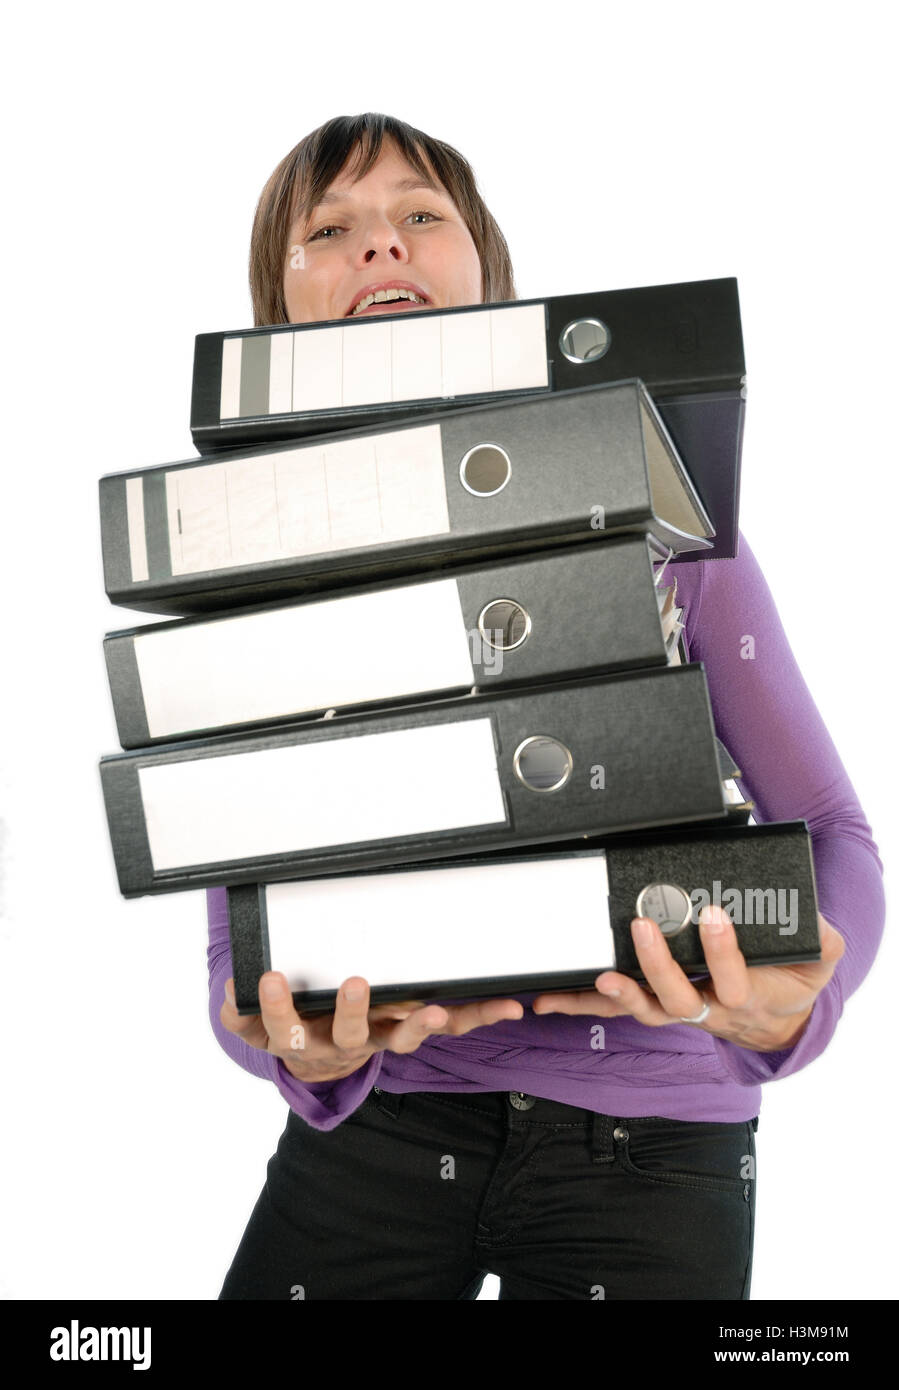 Employee carrying a heavy pile of documents. Stock Photo